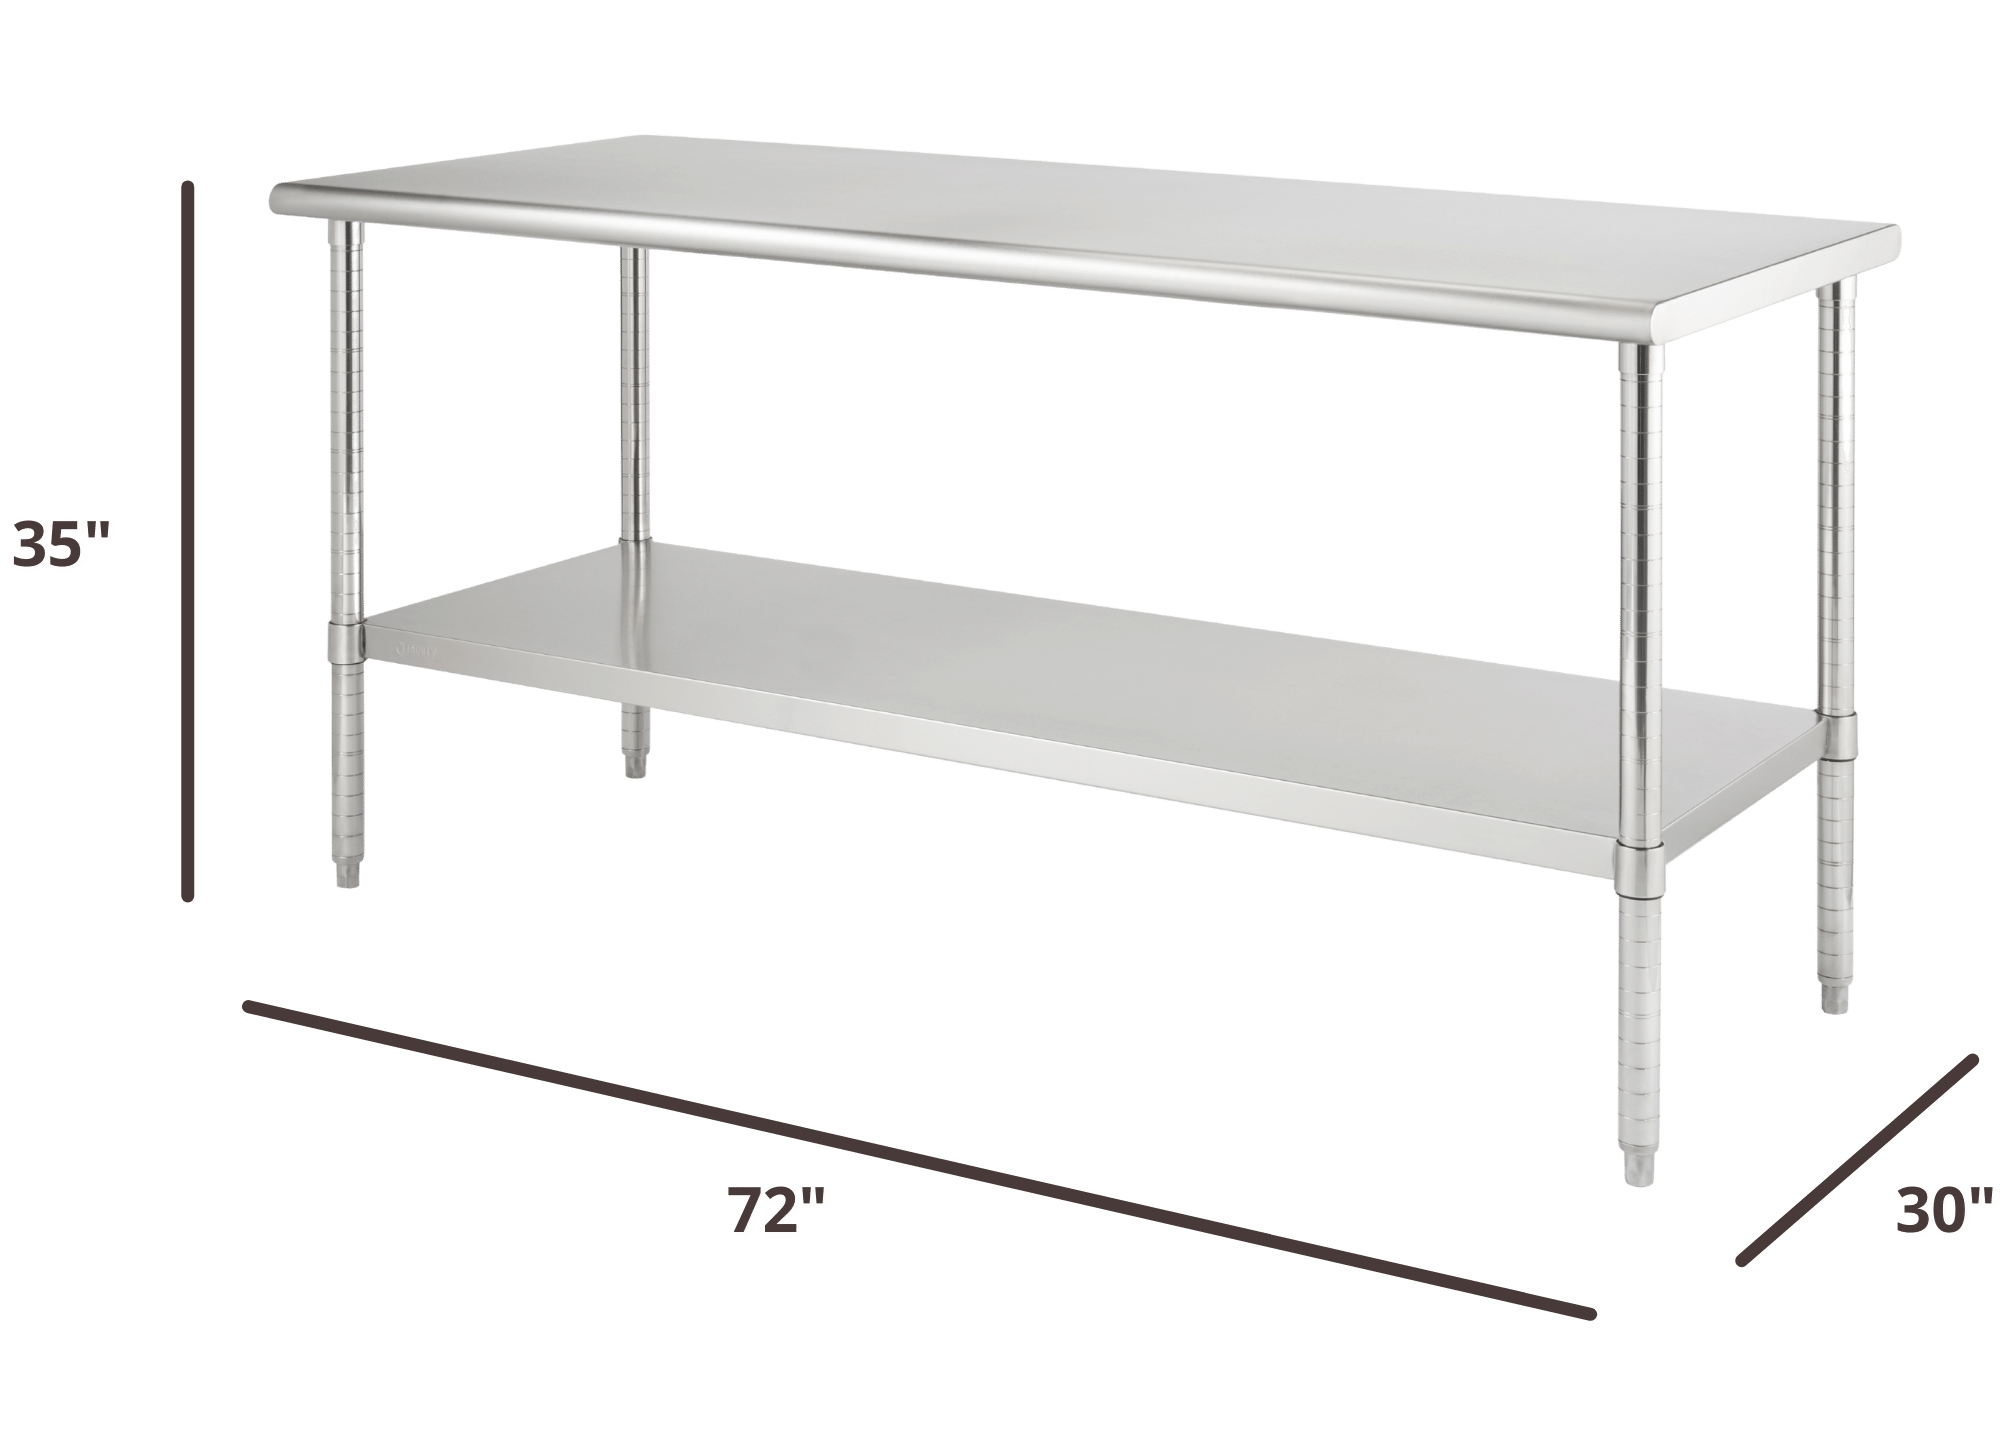 72 inches wide by 30 inches deep stainless steel prep table